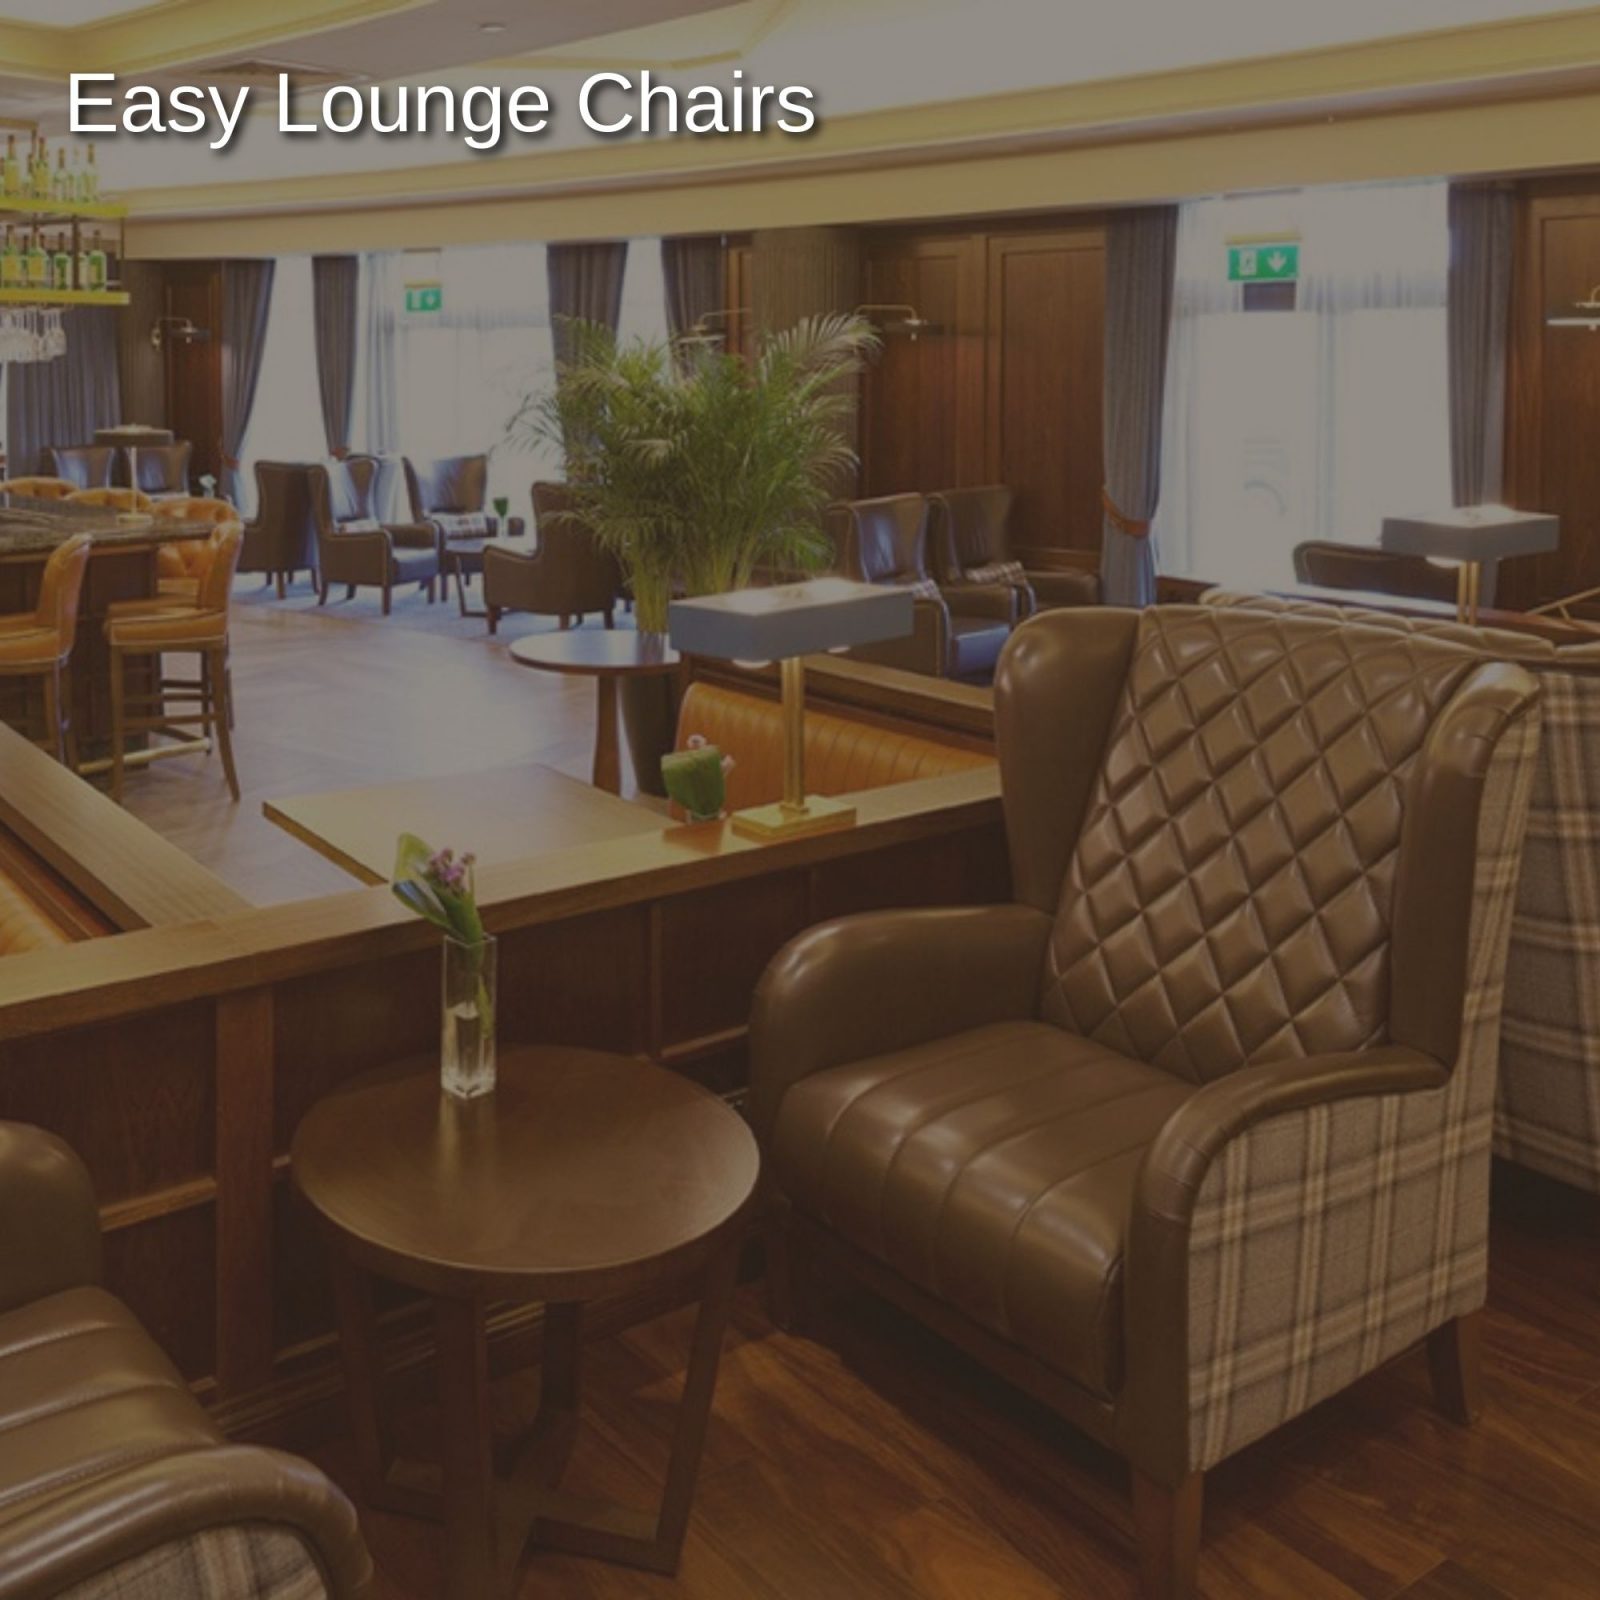 Easy Lounge Chairs 1